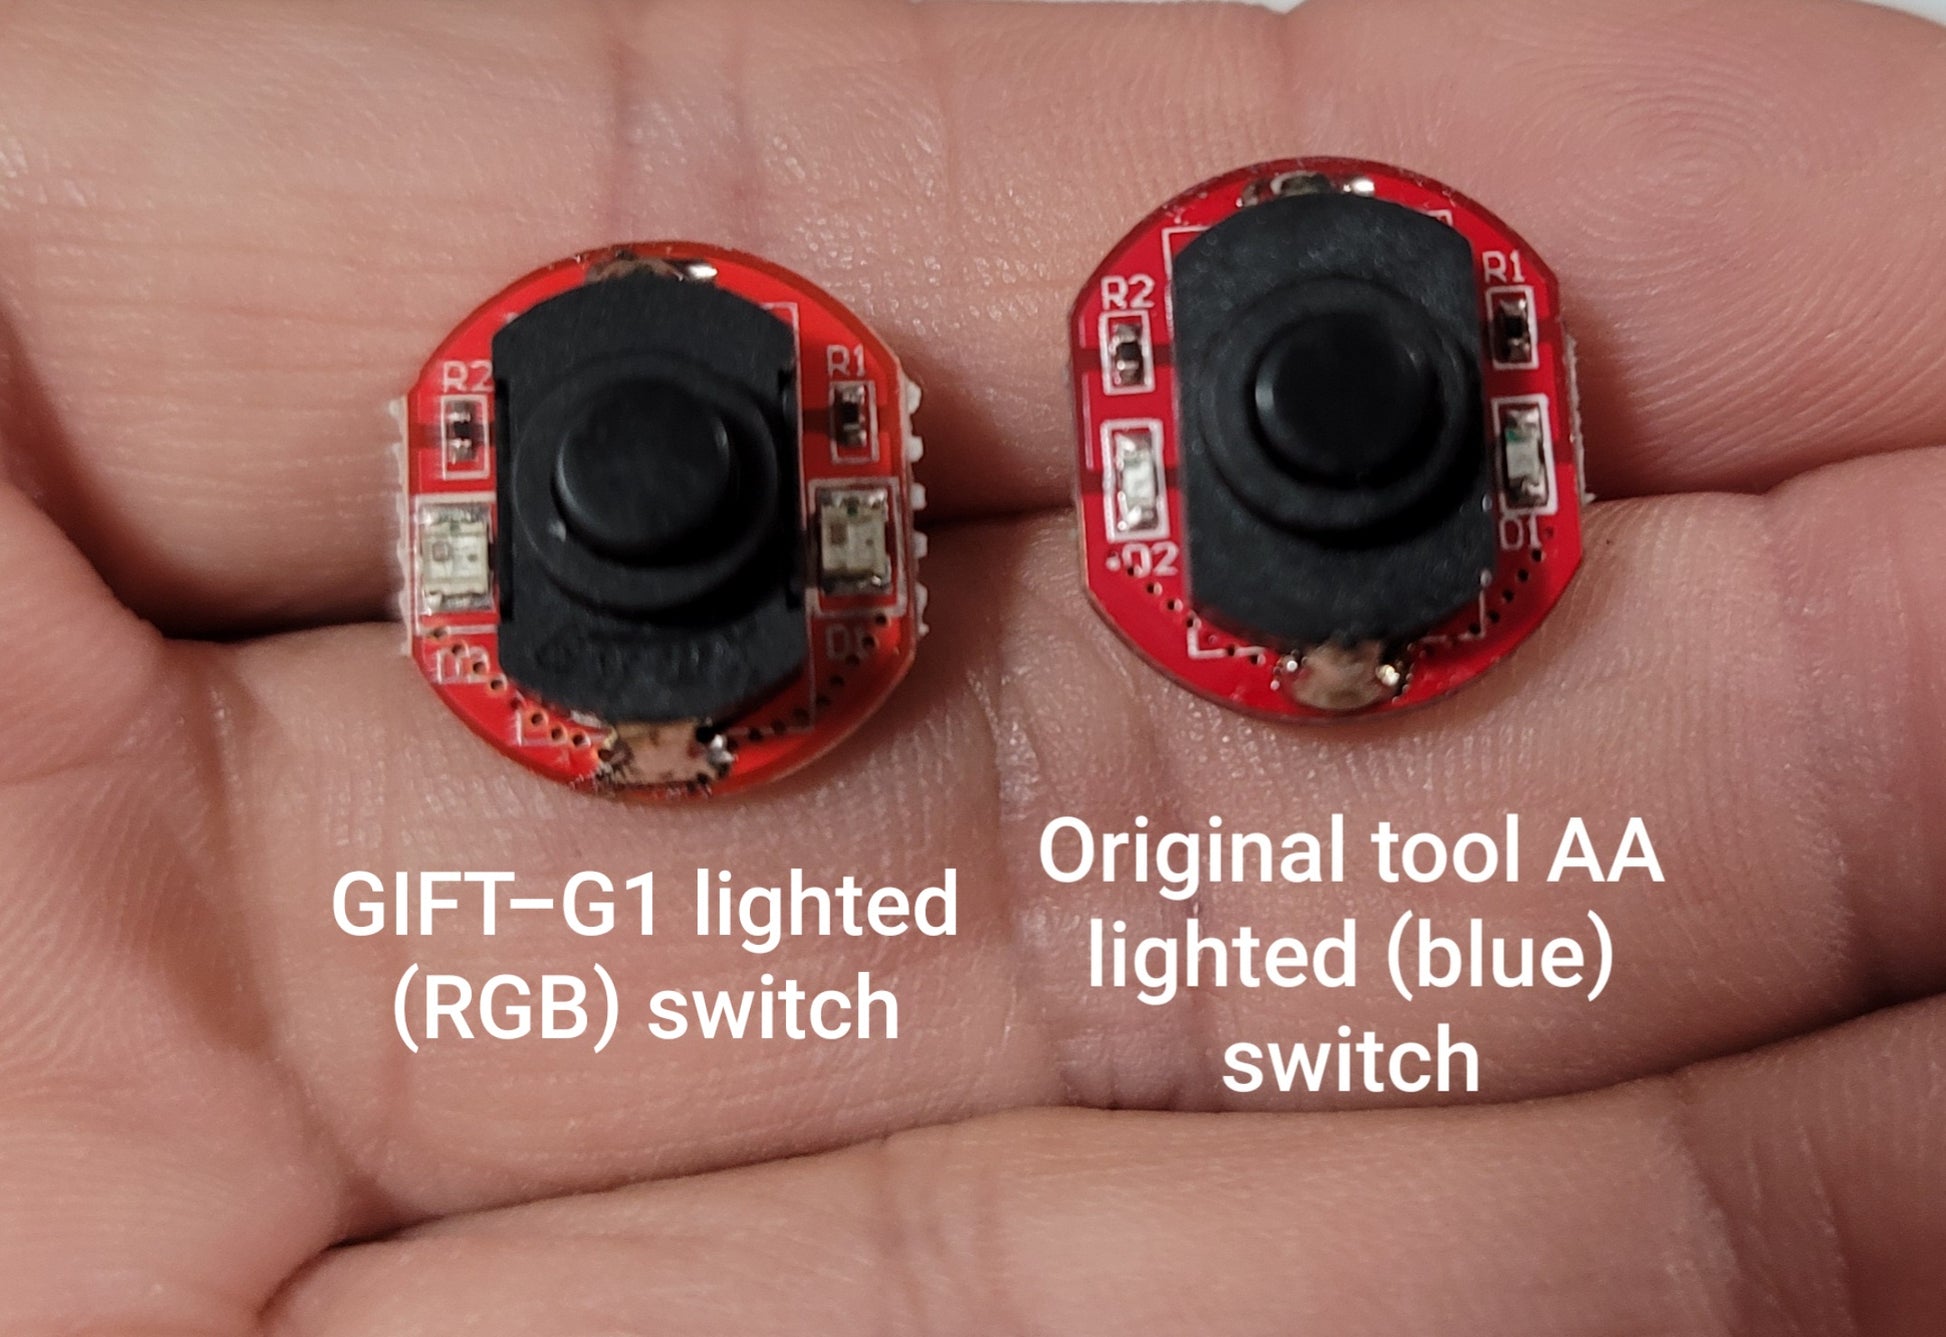 Lumintop Tool AA Replacement RGB Lighted Switch